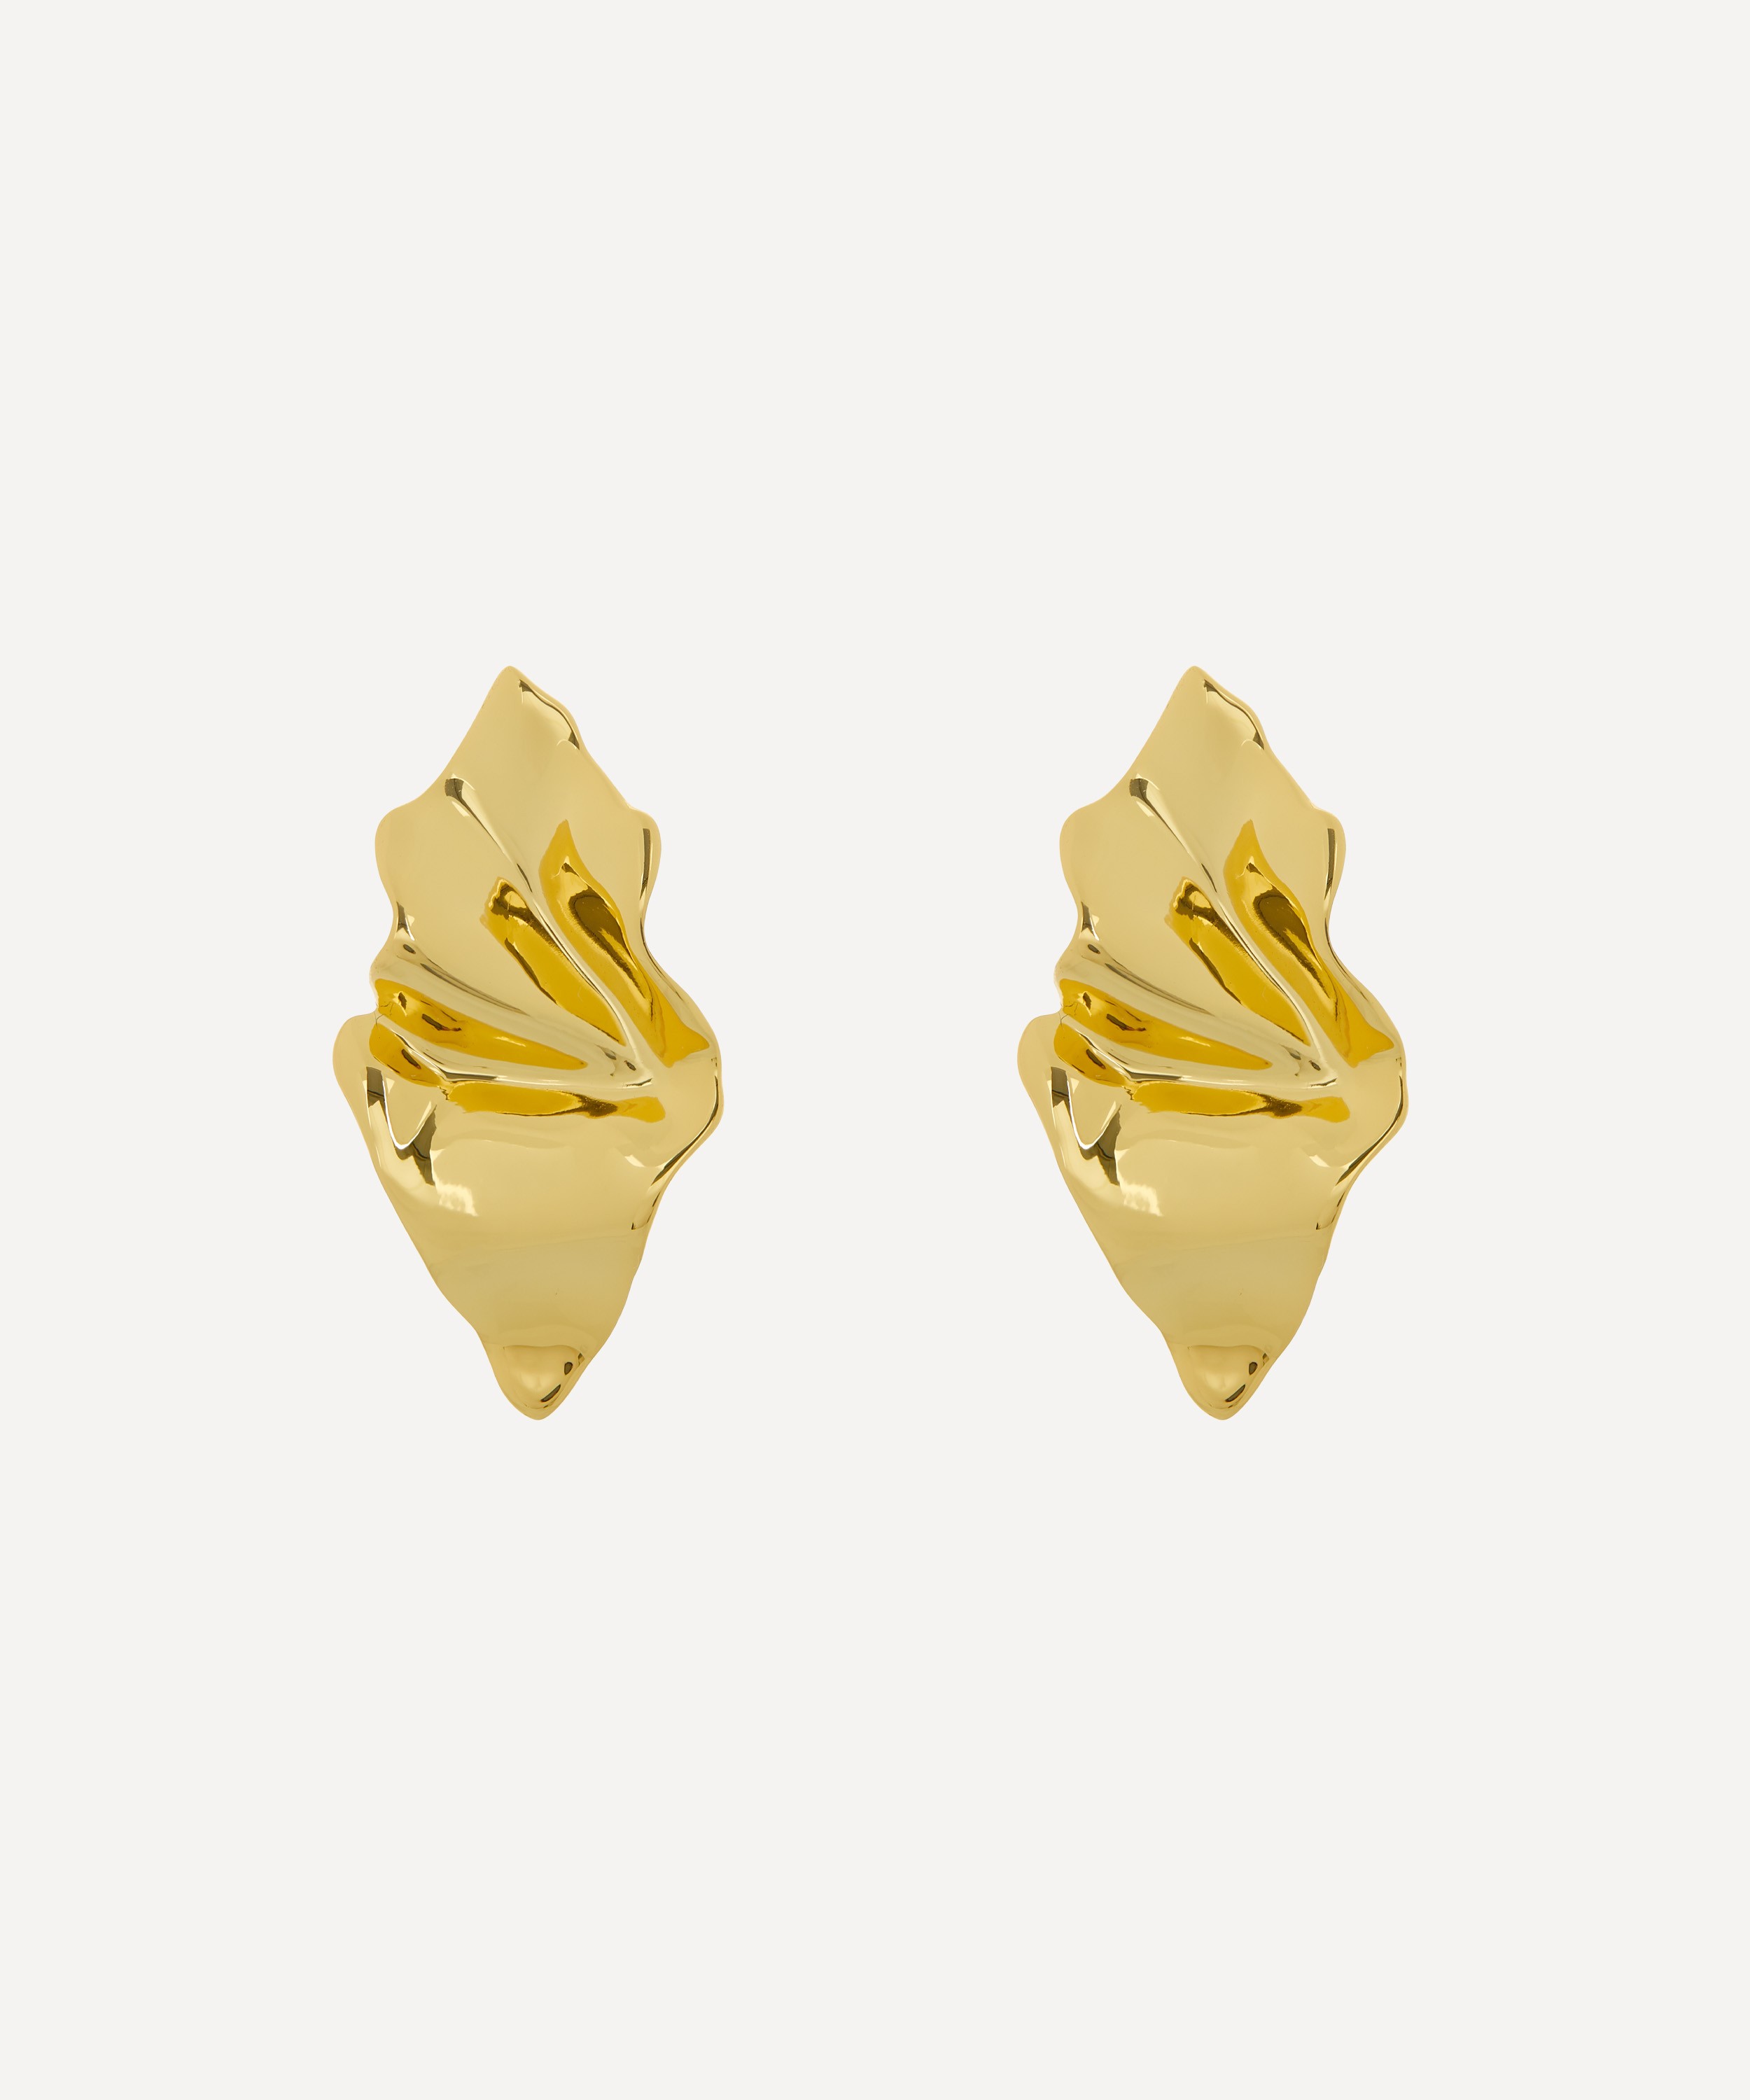 Alexis Bittar 14ct Gold-Plated Crumpled Small Stud Earrings